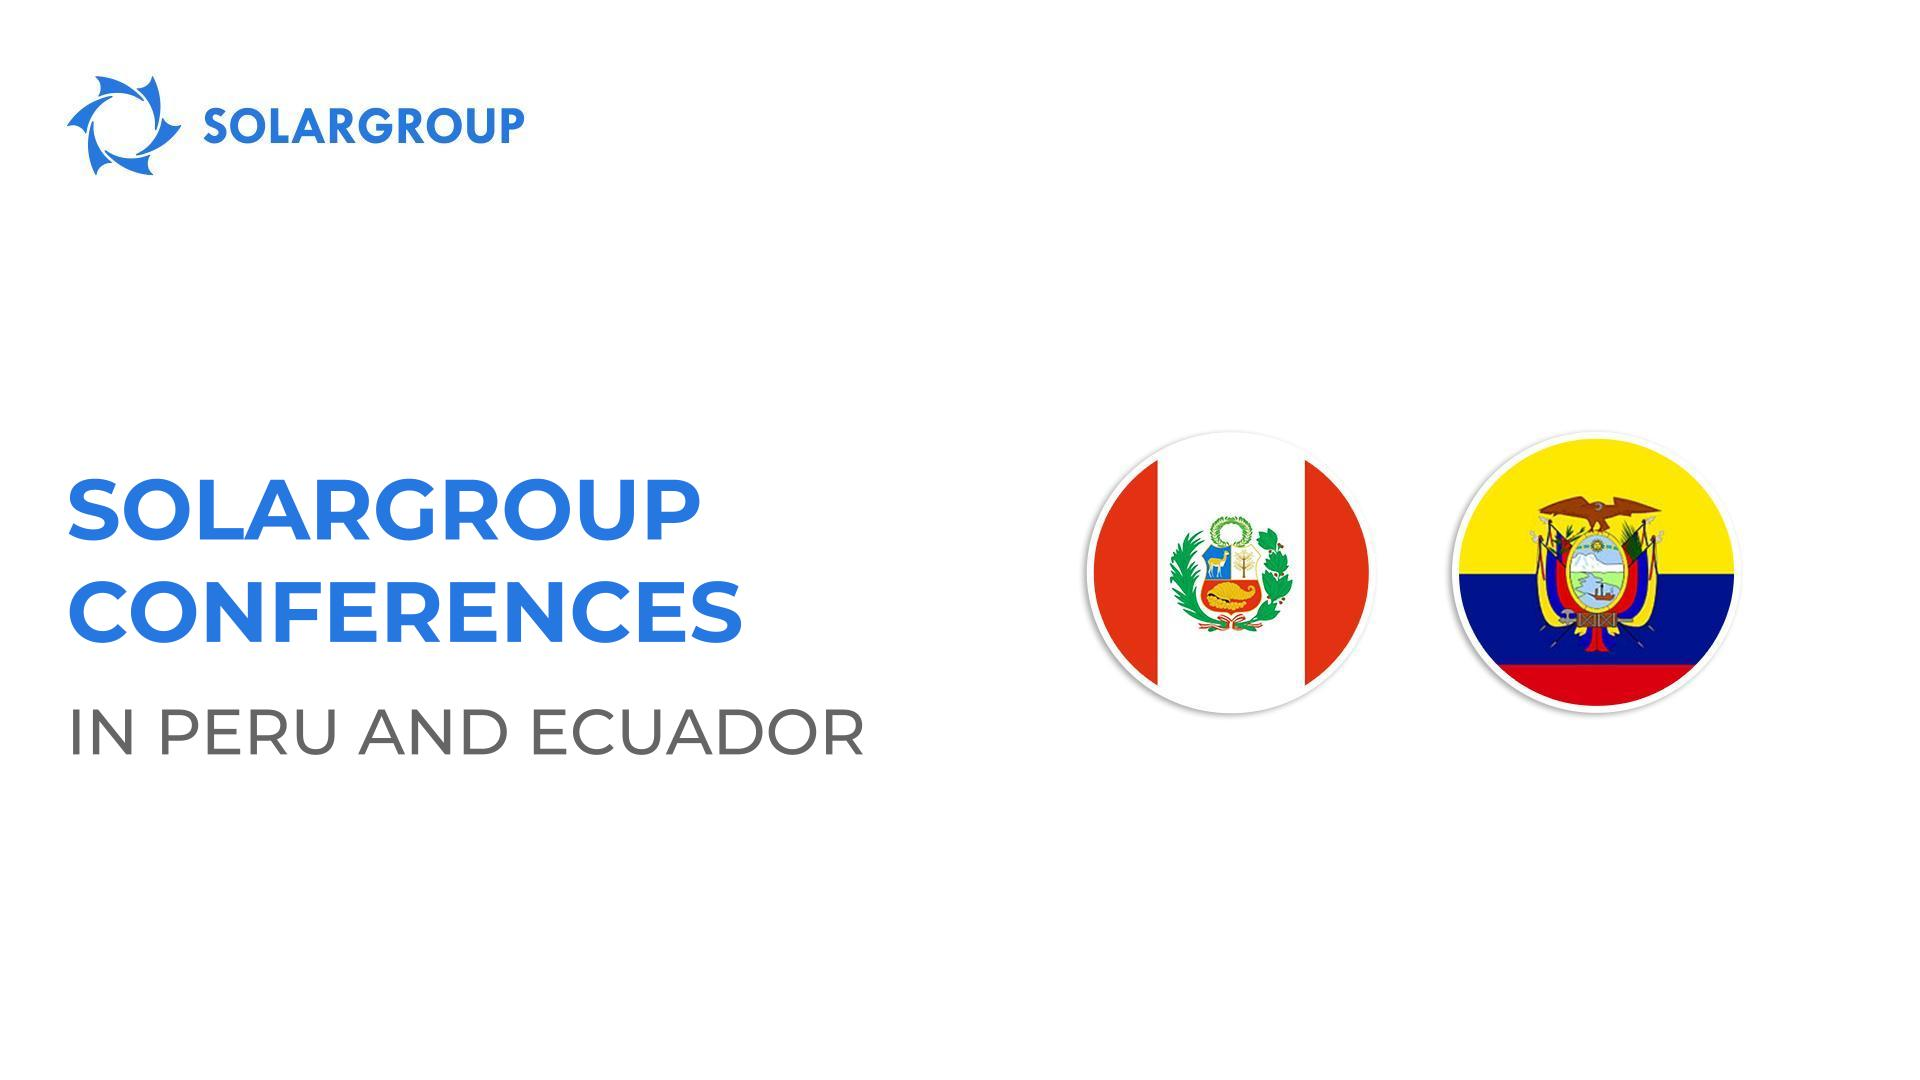 Latin America: the tour of SOLARGROUP conferences continues